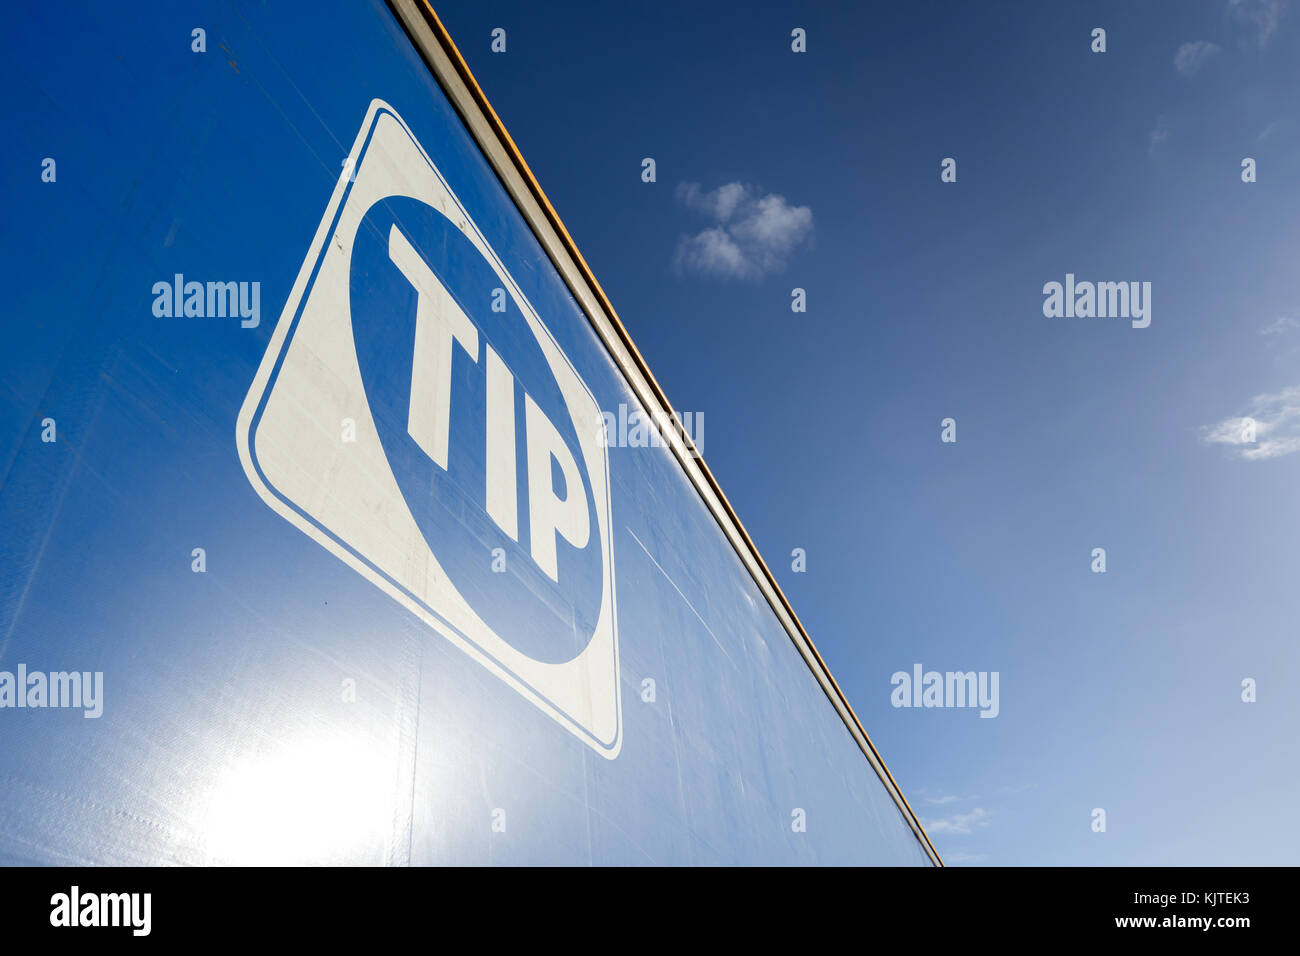 TIP curtain side trailer. TIP provides transportation and logistics customers with leasing, rental, maintenance and repair and other solutions. Stock Photo